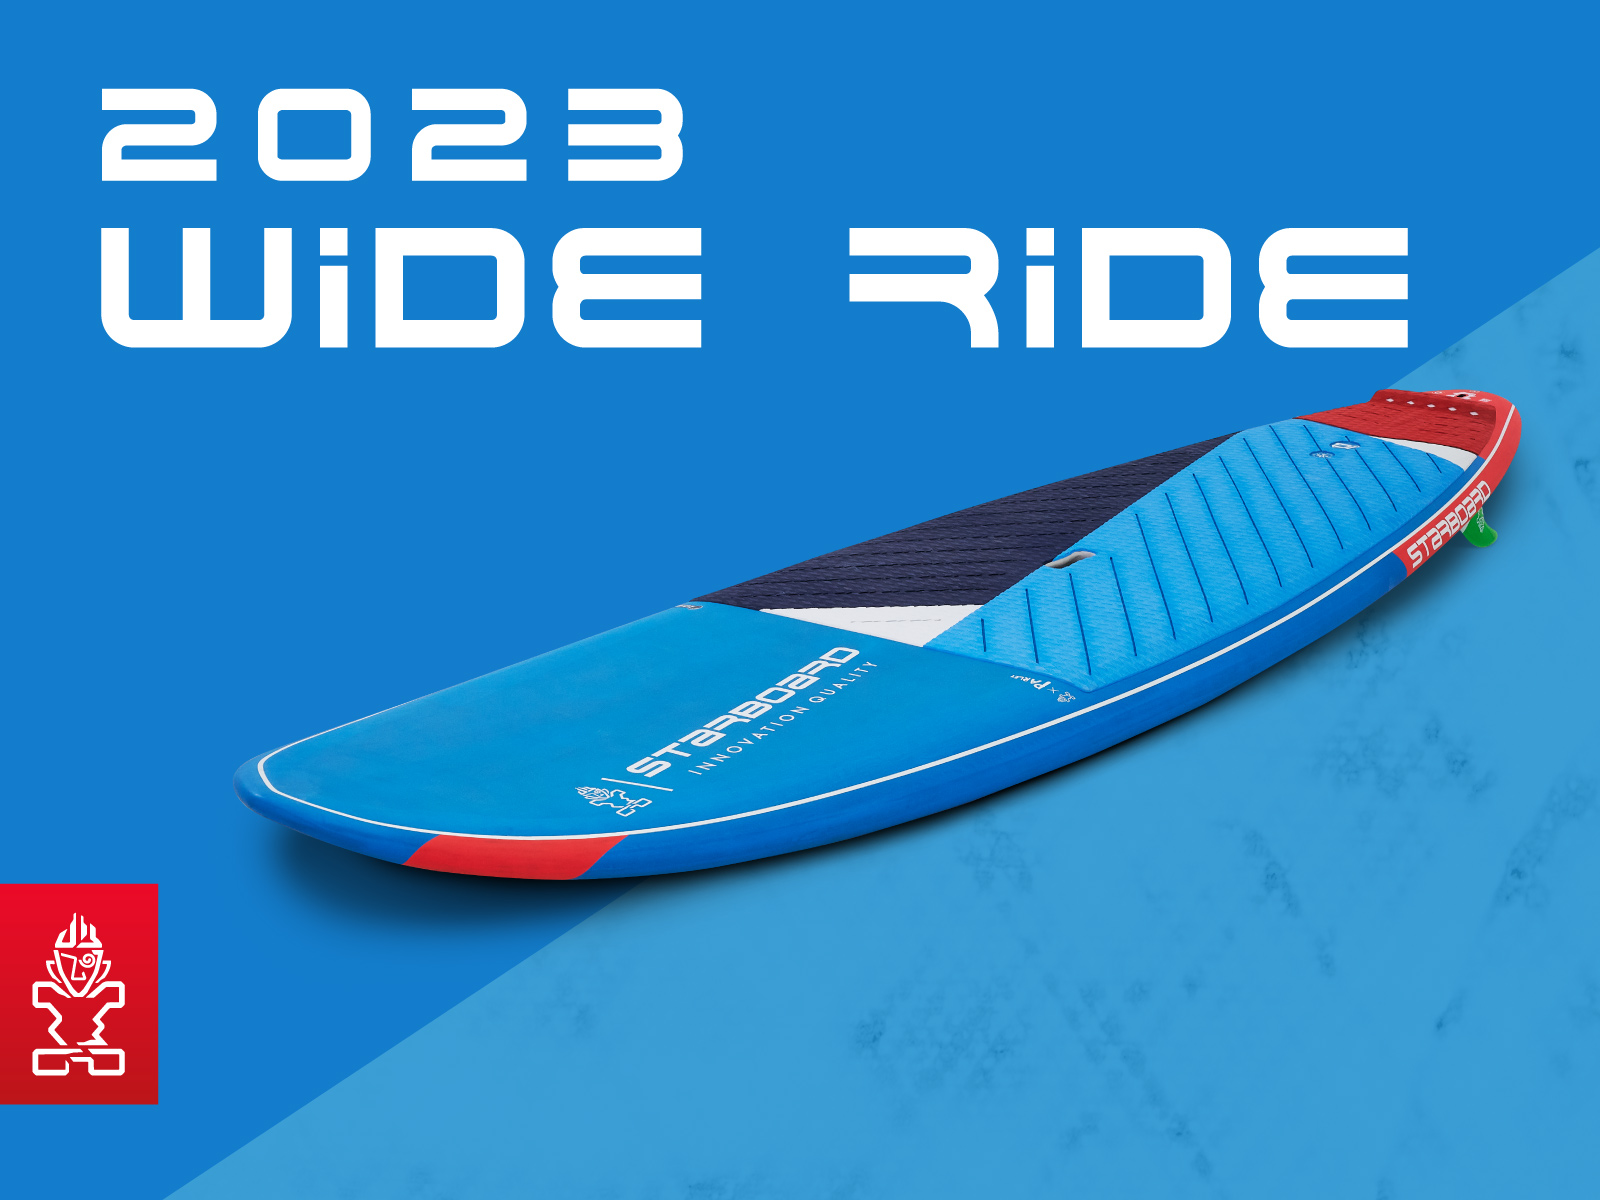 2023 Wide Ride » Starboard SUP